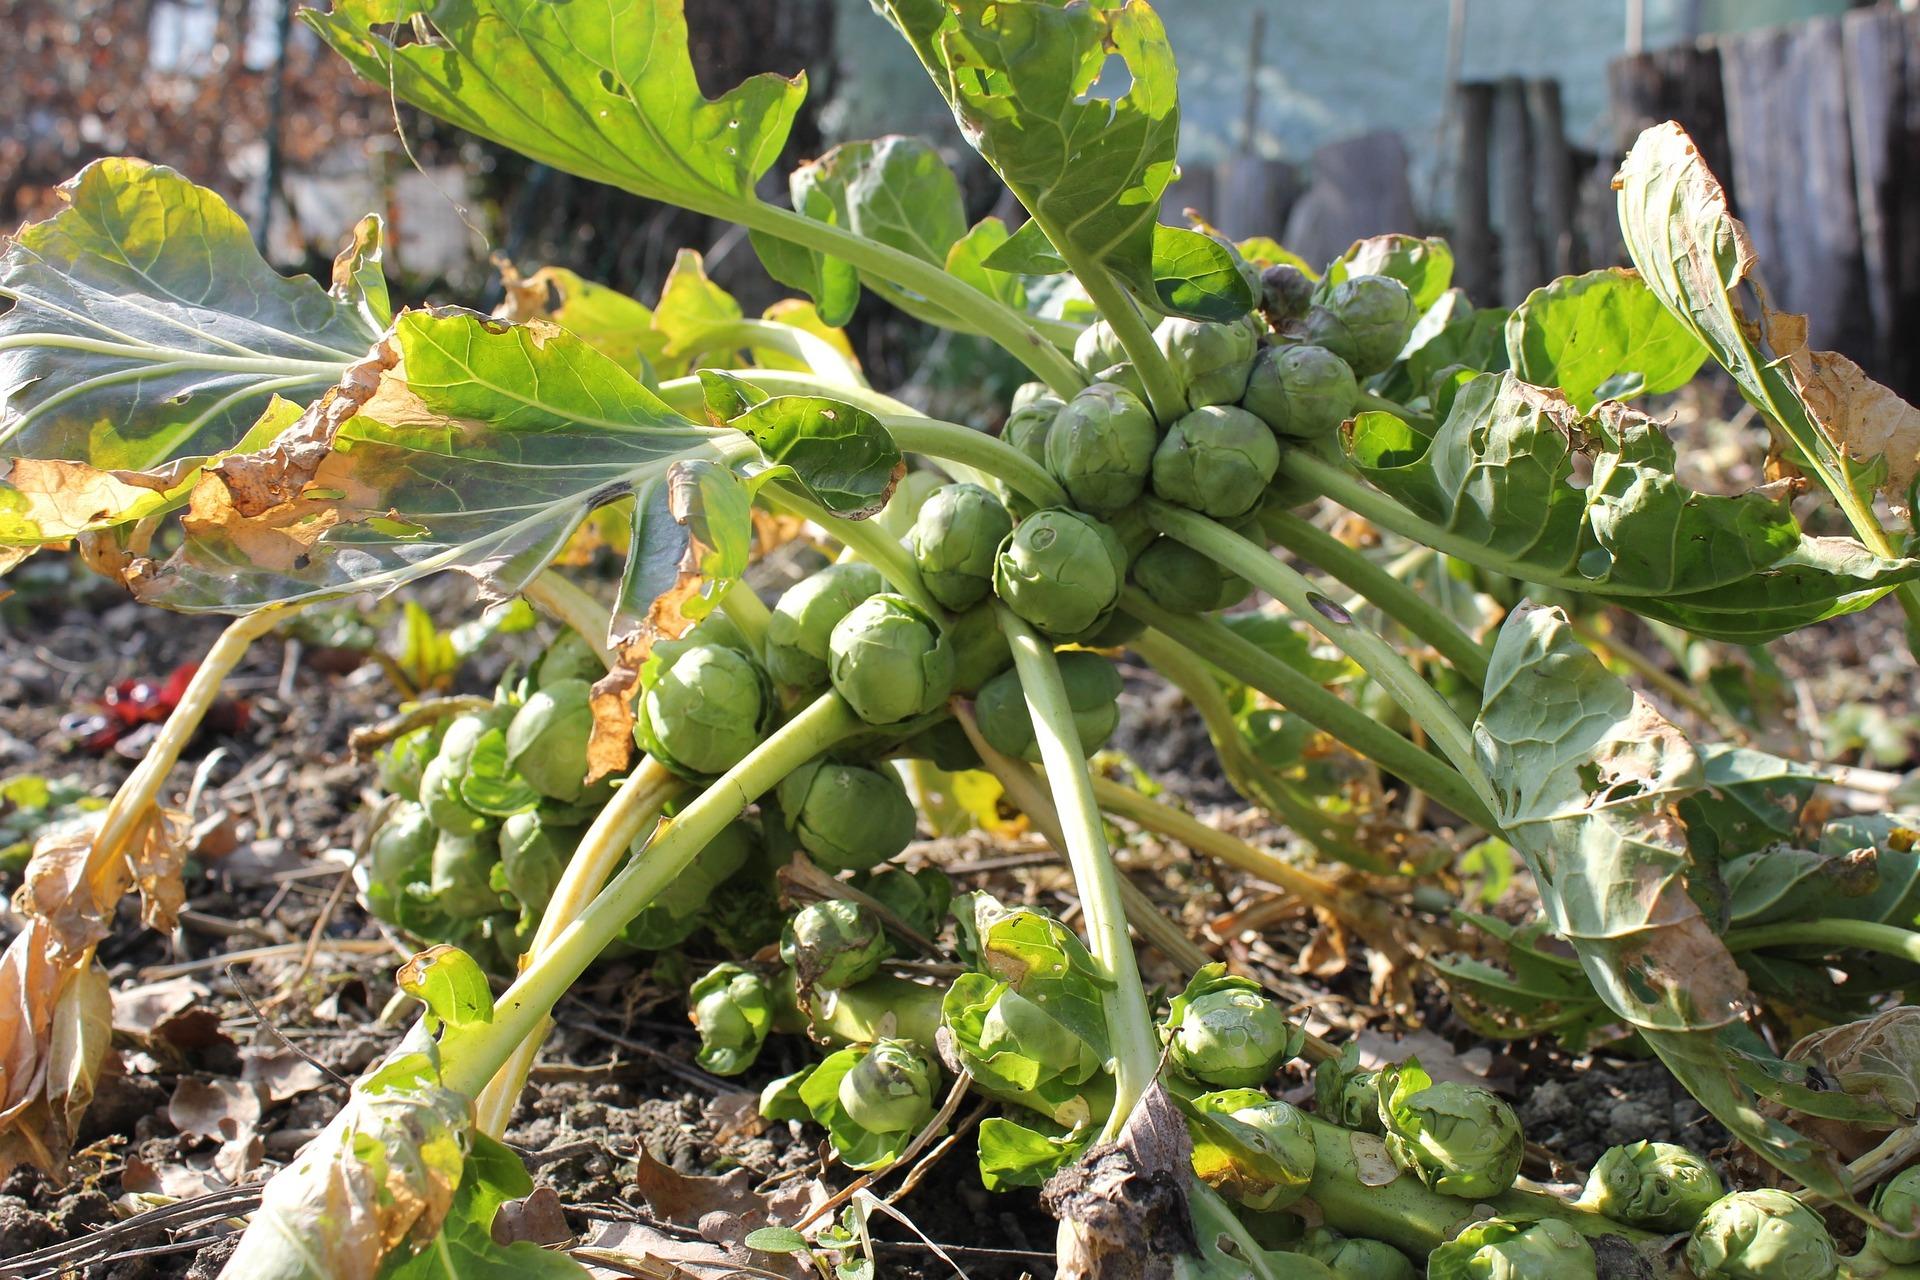 uploads/images/Brussels Sprouts 283807_1920